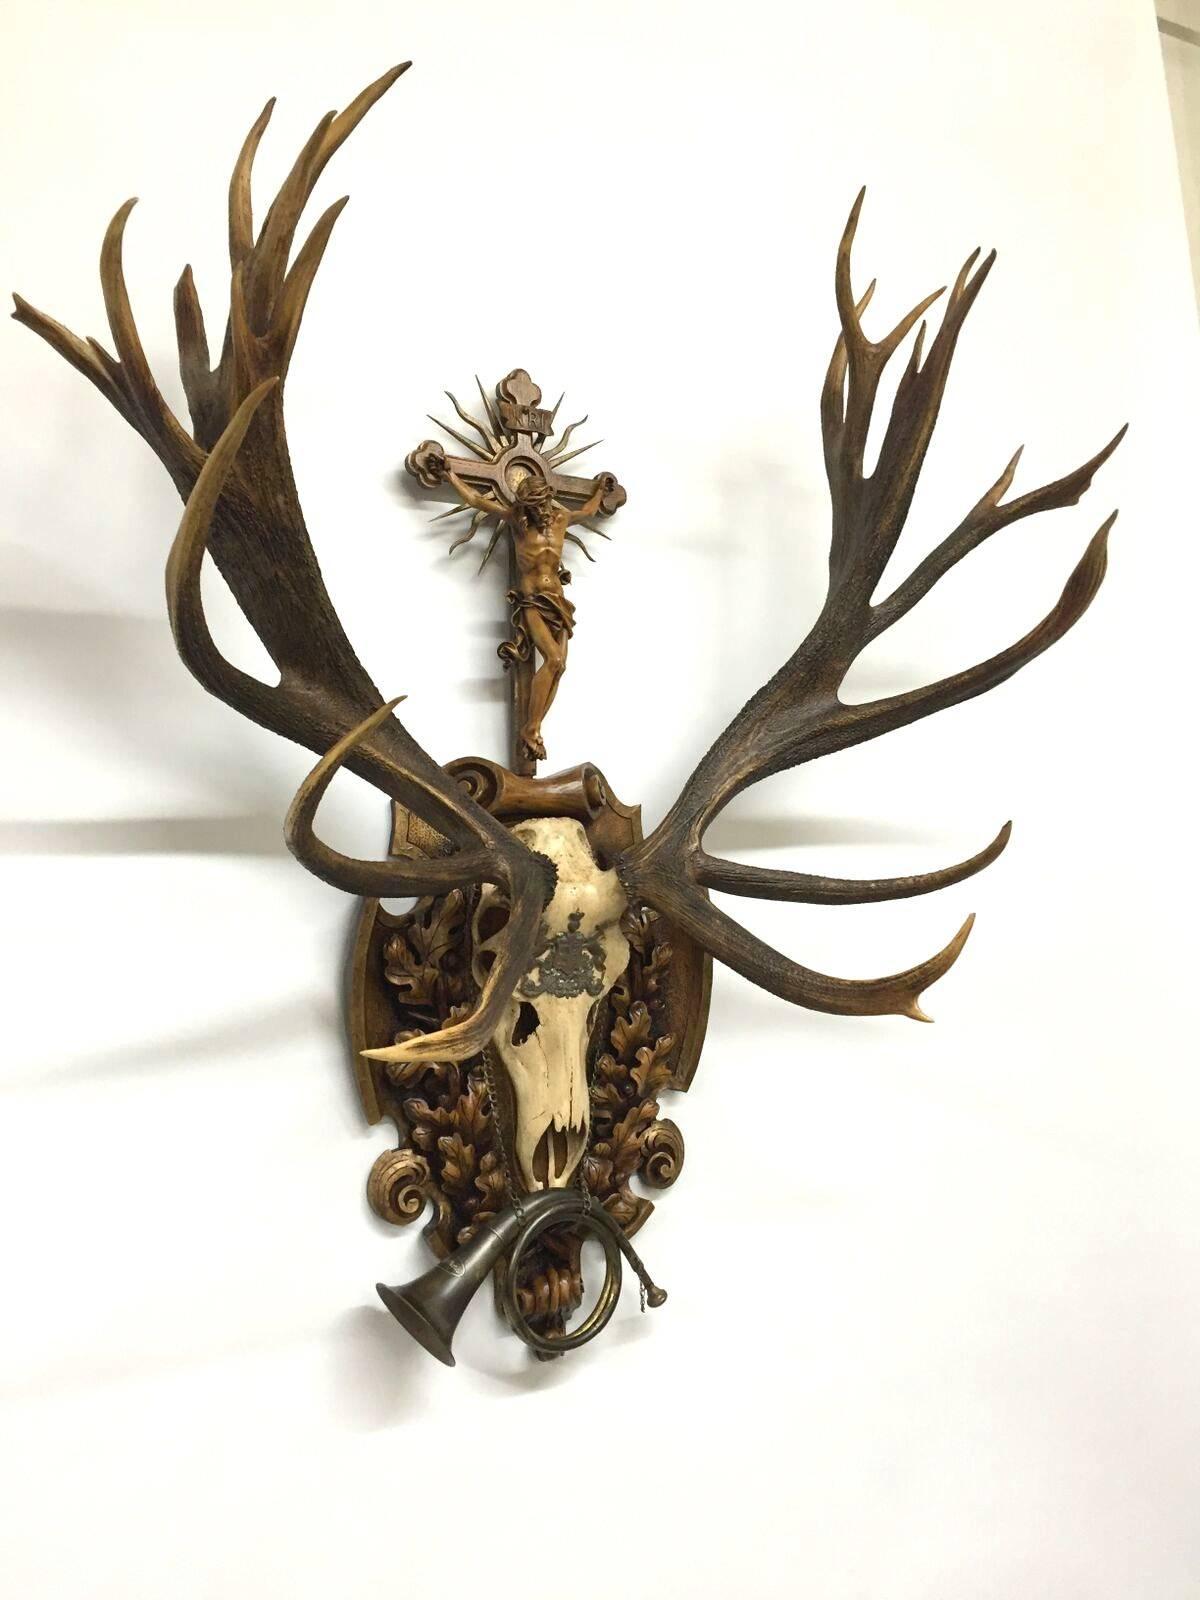 Truly an exceptional piece in the collection, this magnificent 19th century St. Hubertus red stag hunt trophy originated from the Eckartsau castle of Emperor Franz Joseph in the Southern Austrian Alps. Eckartsau was a favorite hunting schloss of the